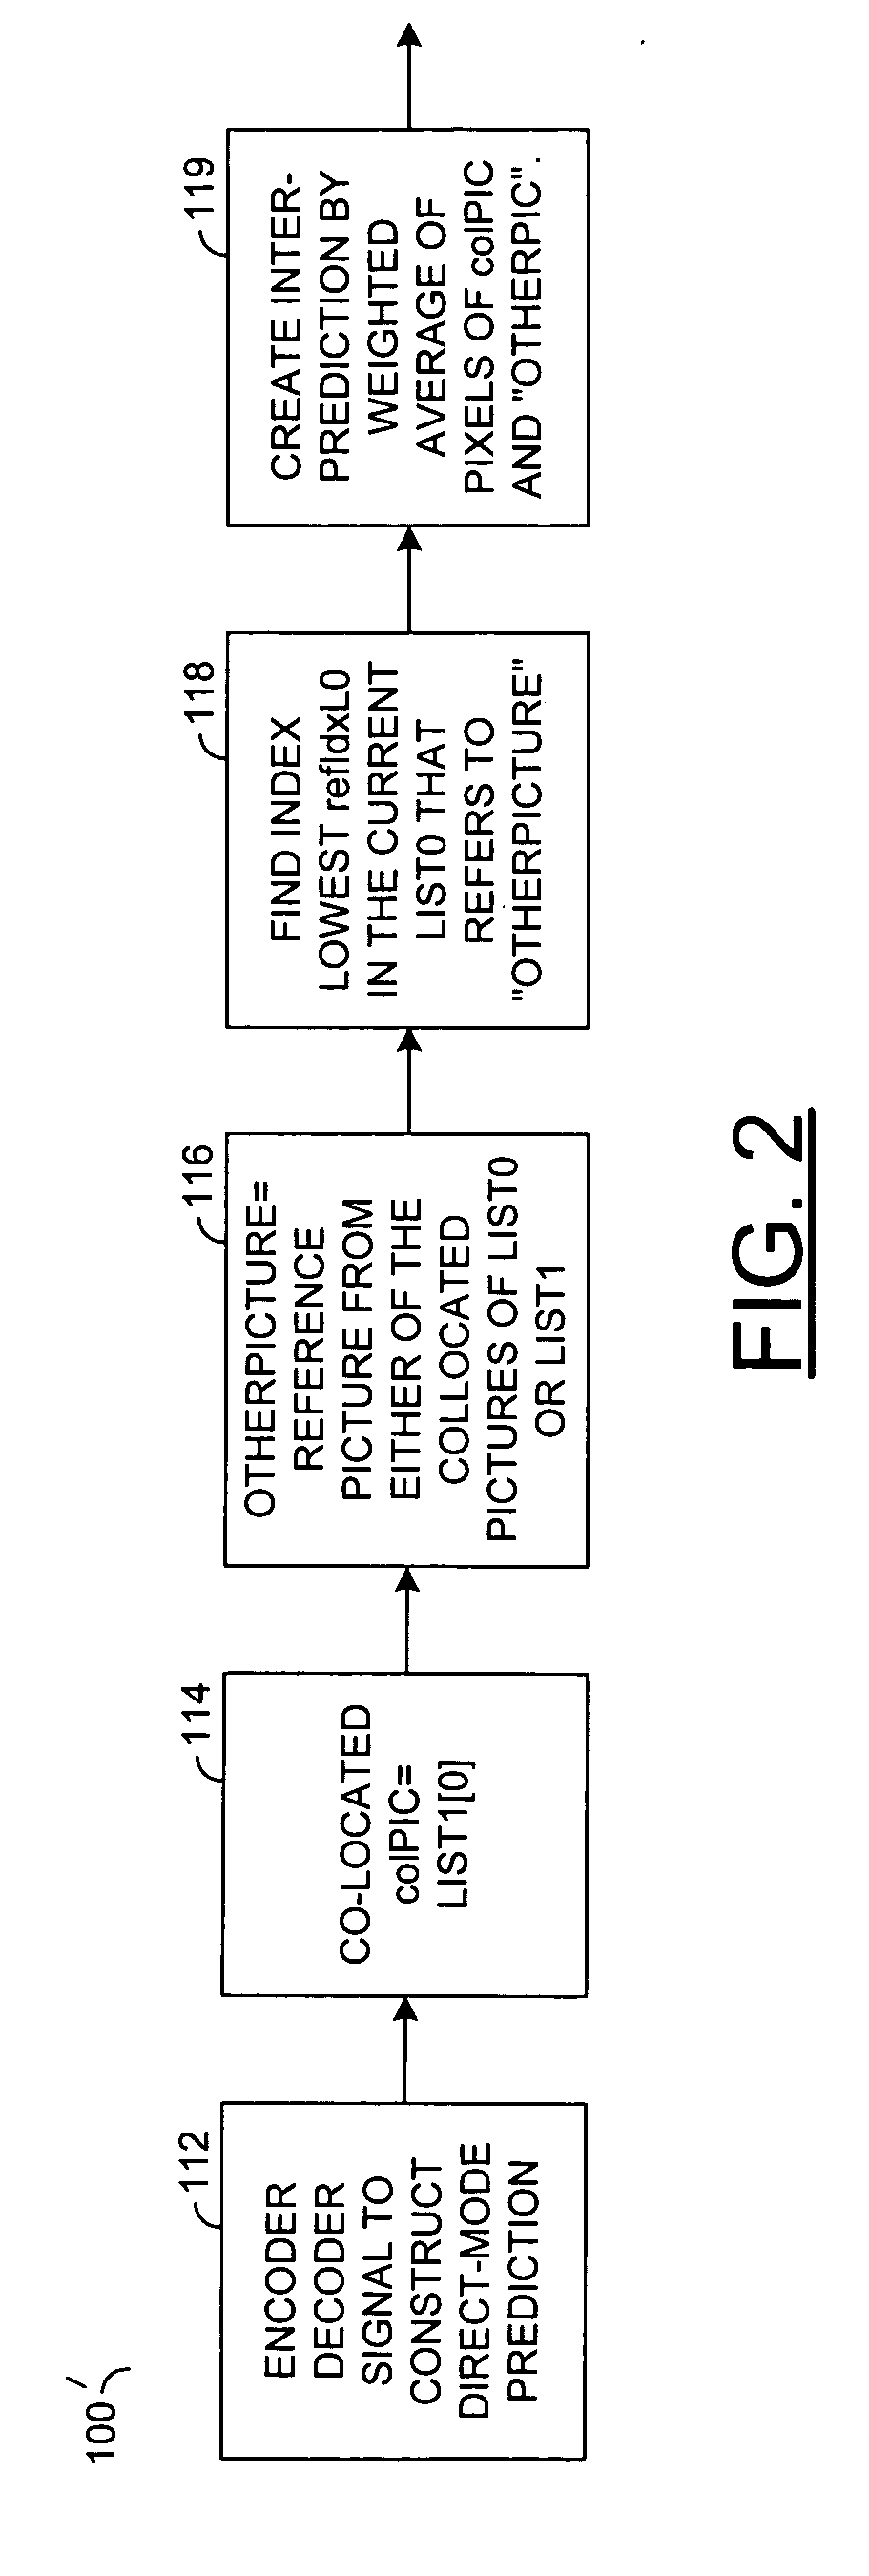 Method and apparatus for determining a second picture for temporal direct-mode block prediction